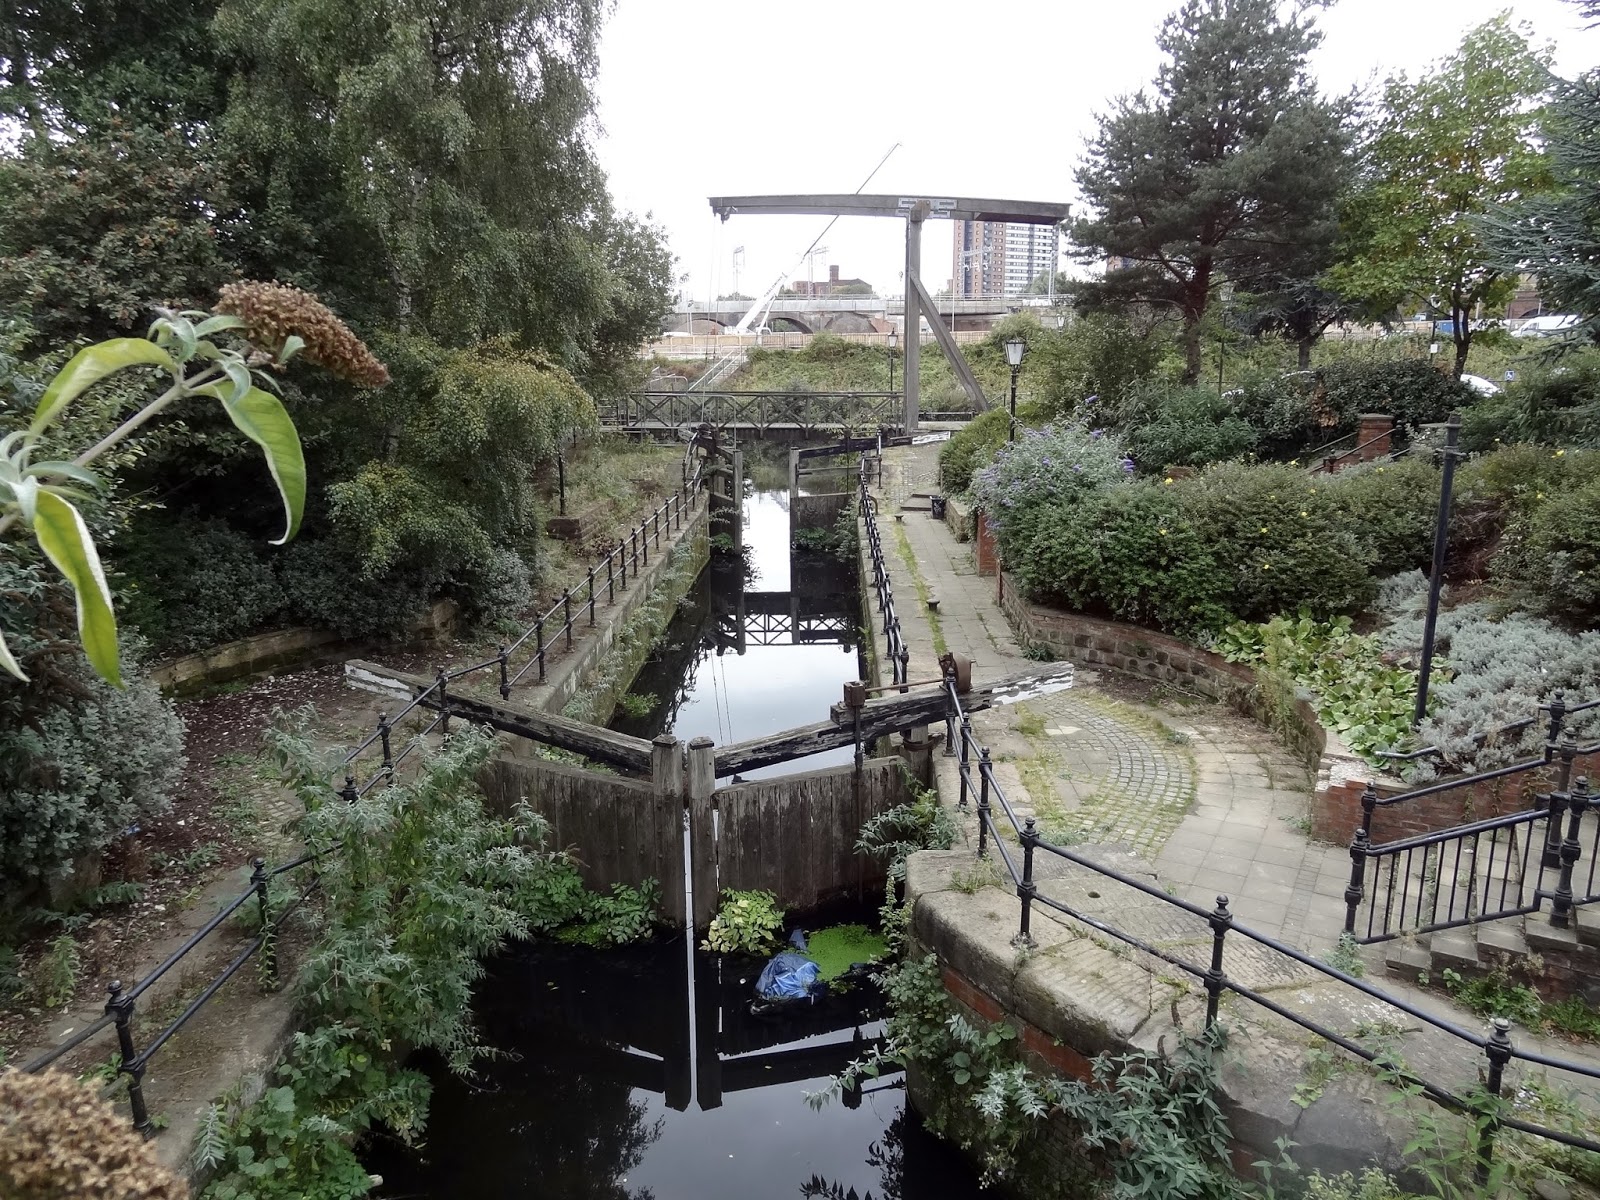 A Blog on the Landscape!: Finding the Manchester, Bury Bolton Canal.